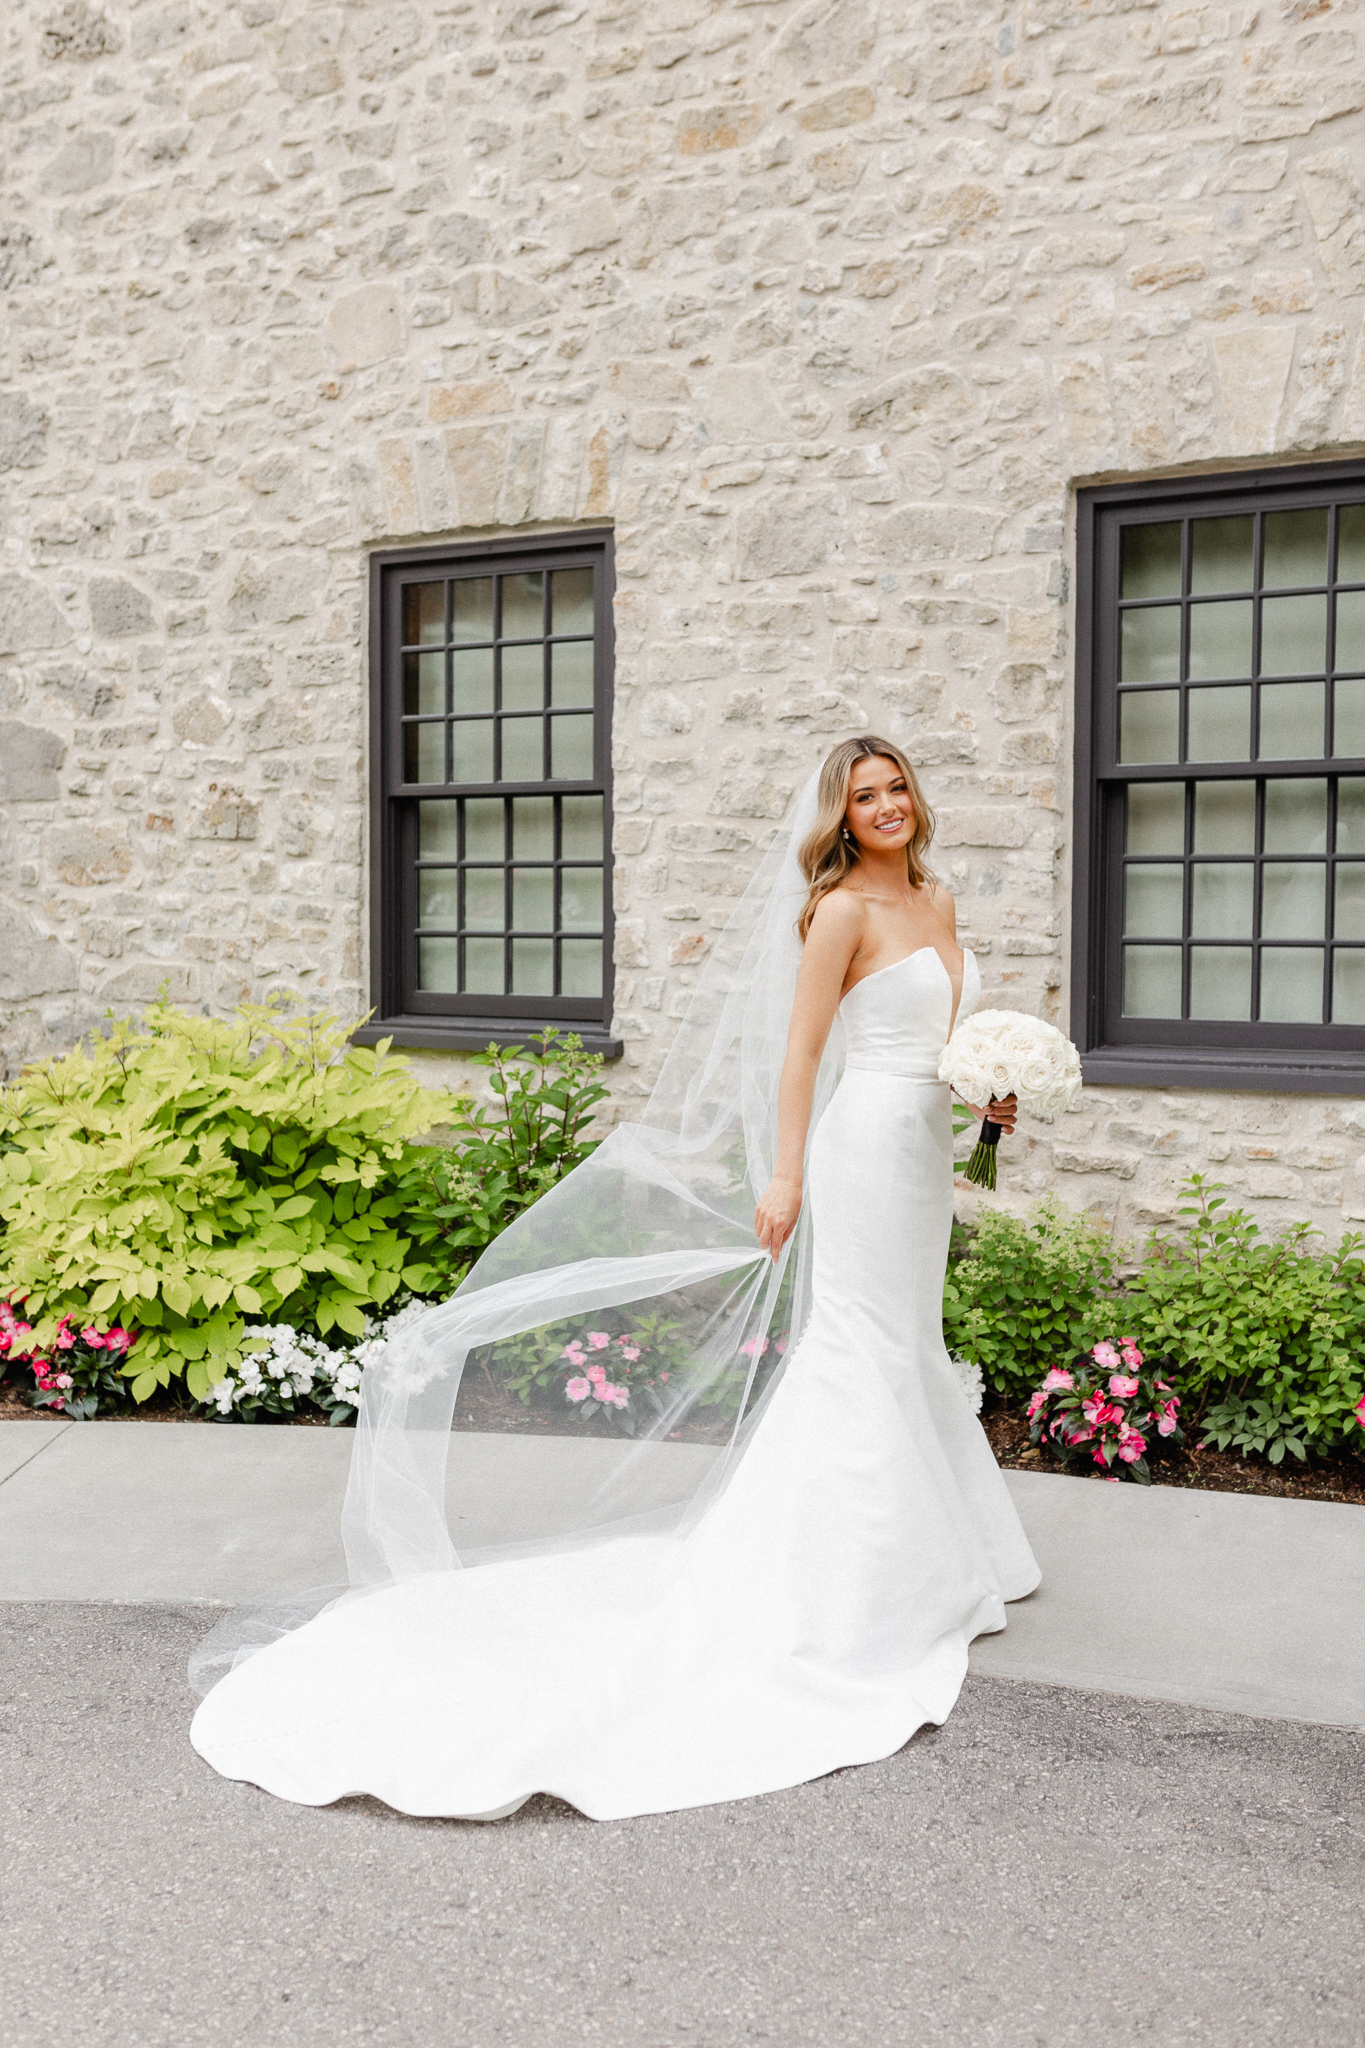 A bride in a white wedding dress posing elegantly in front of a stone building